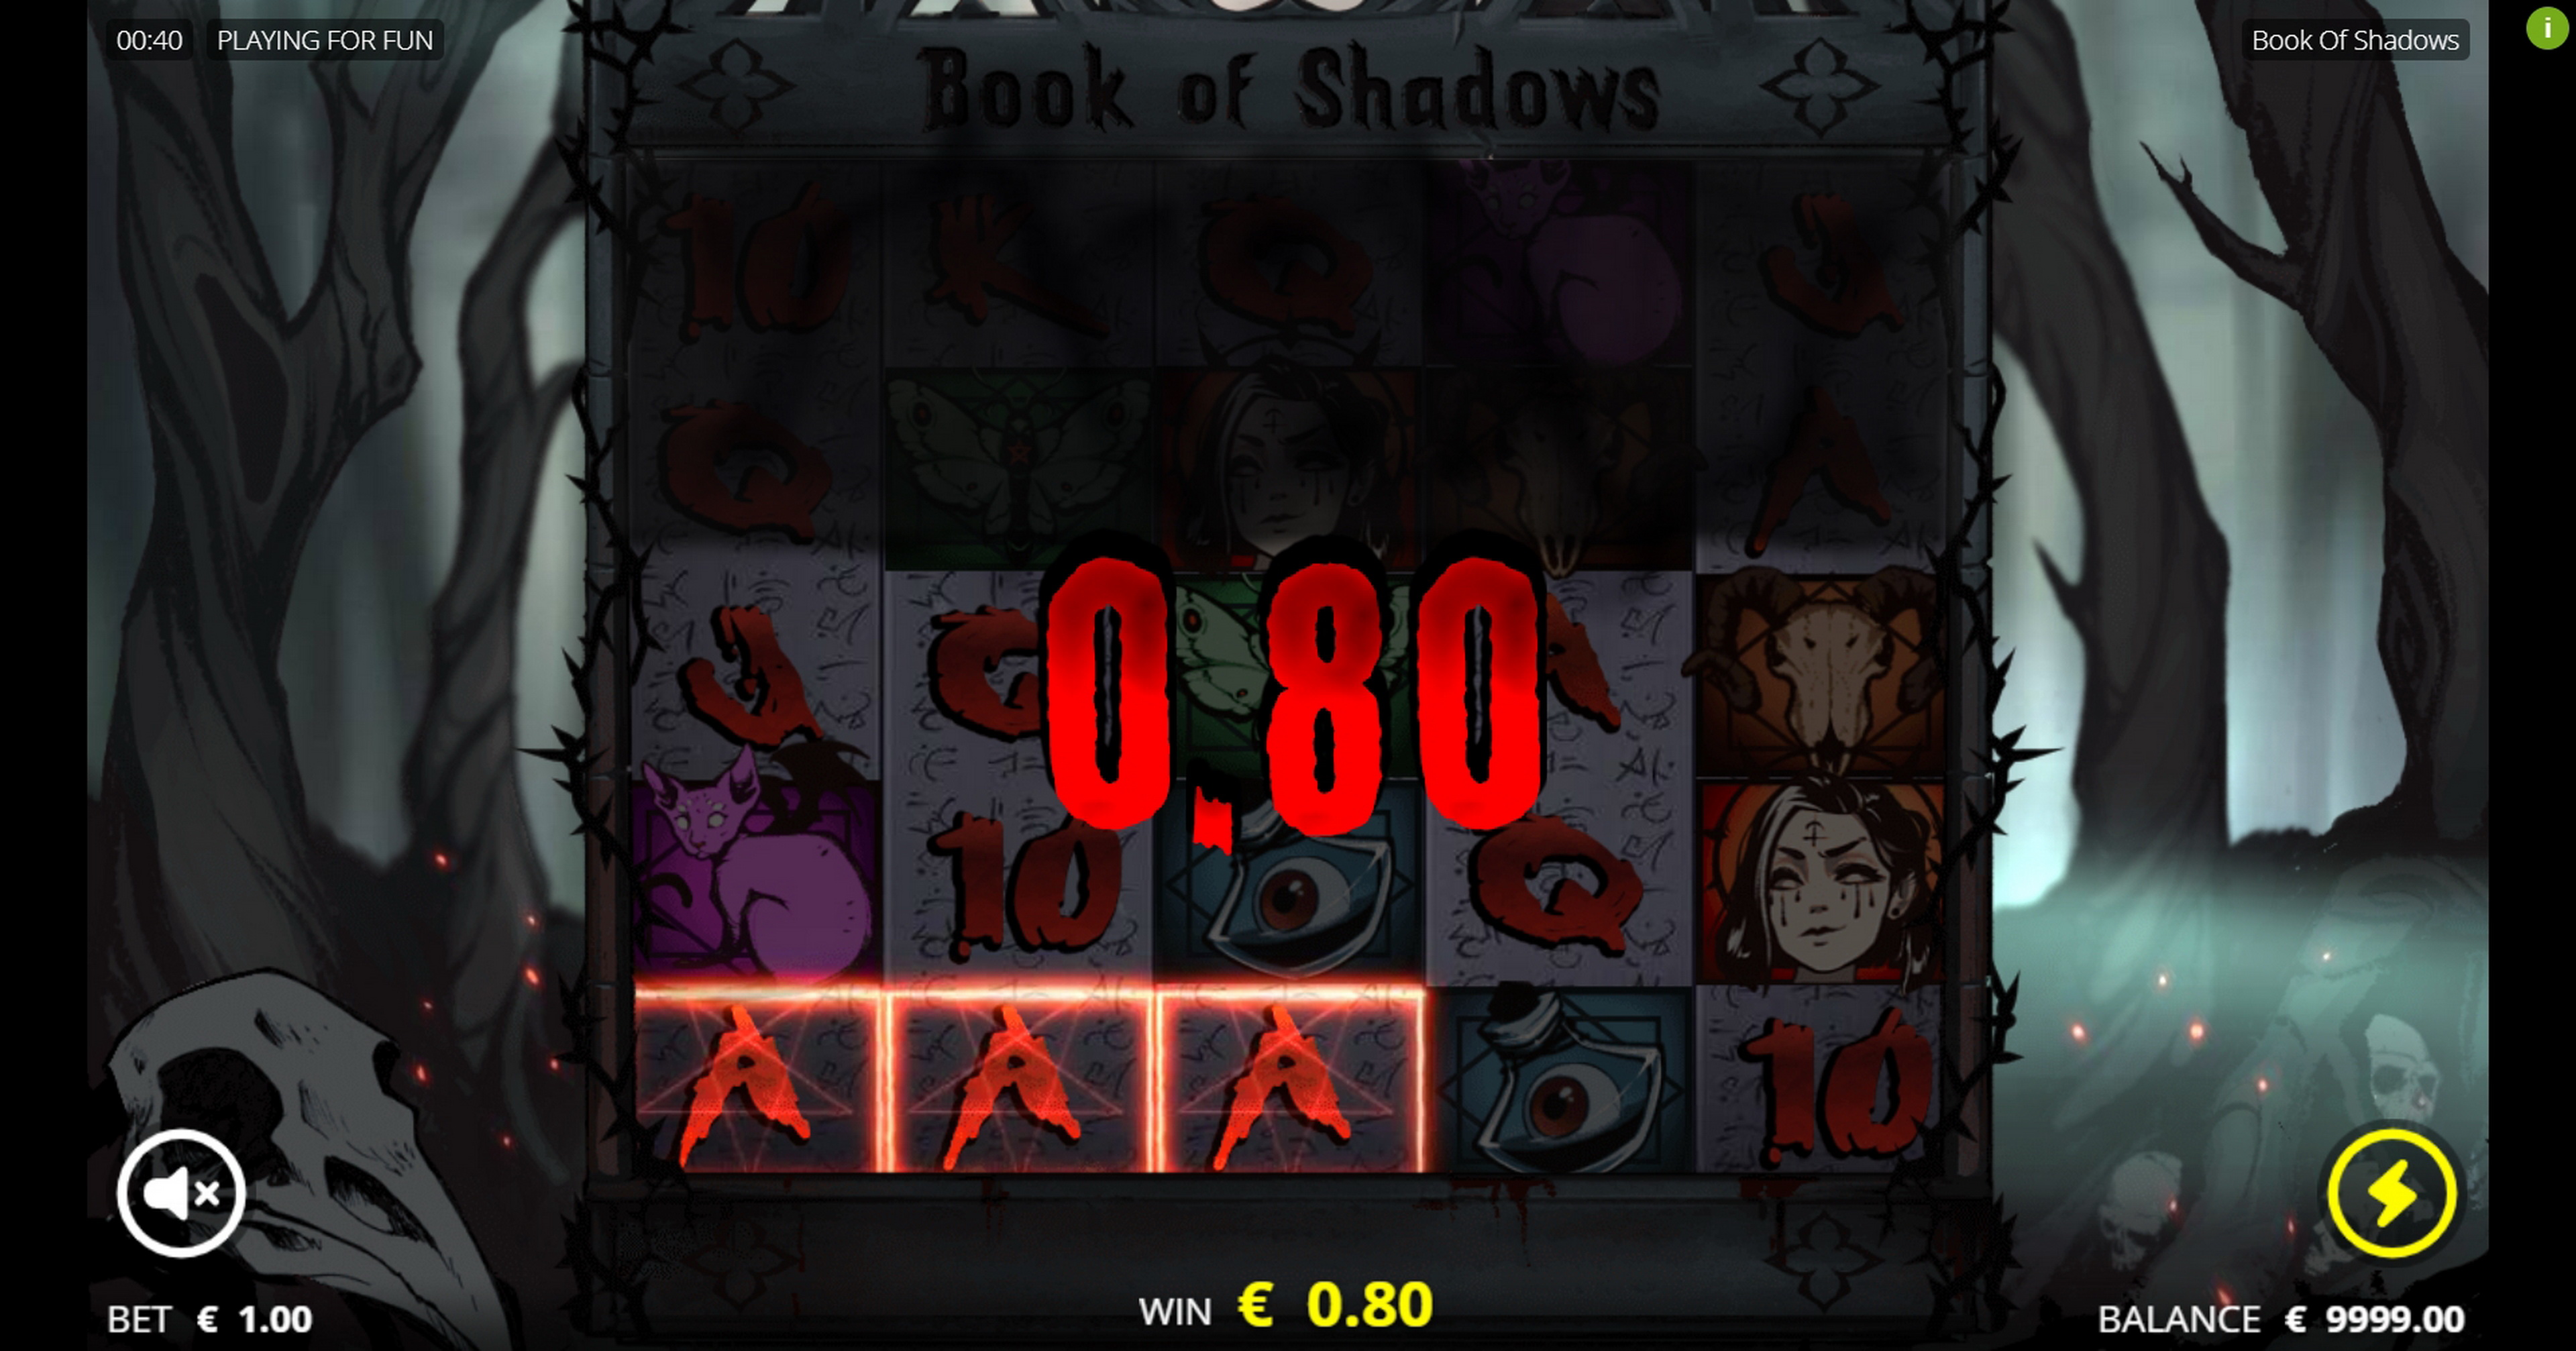 Win Money in Book of Shadows Free Slot Game by Nolimit City